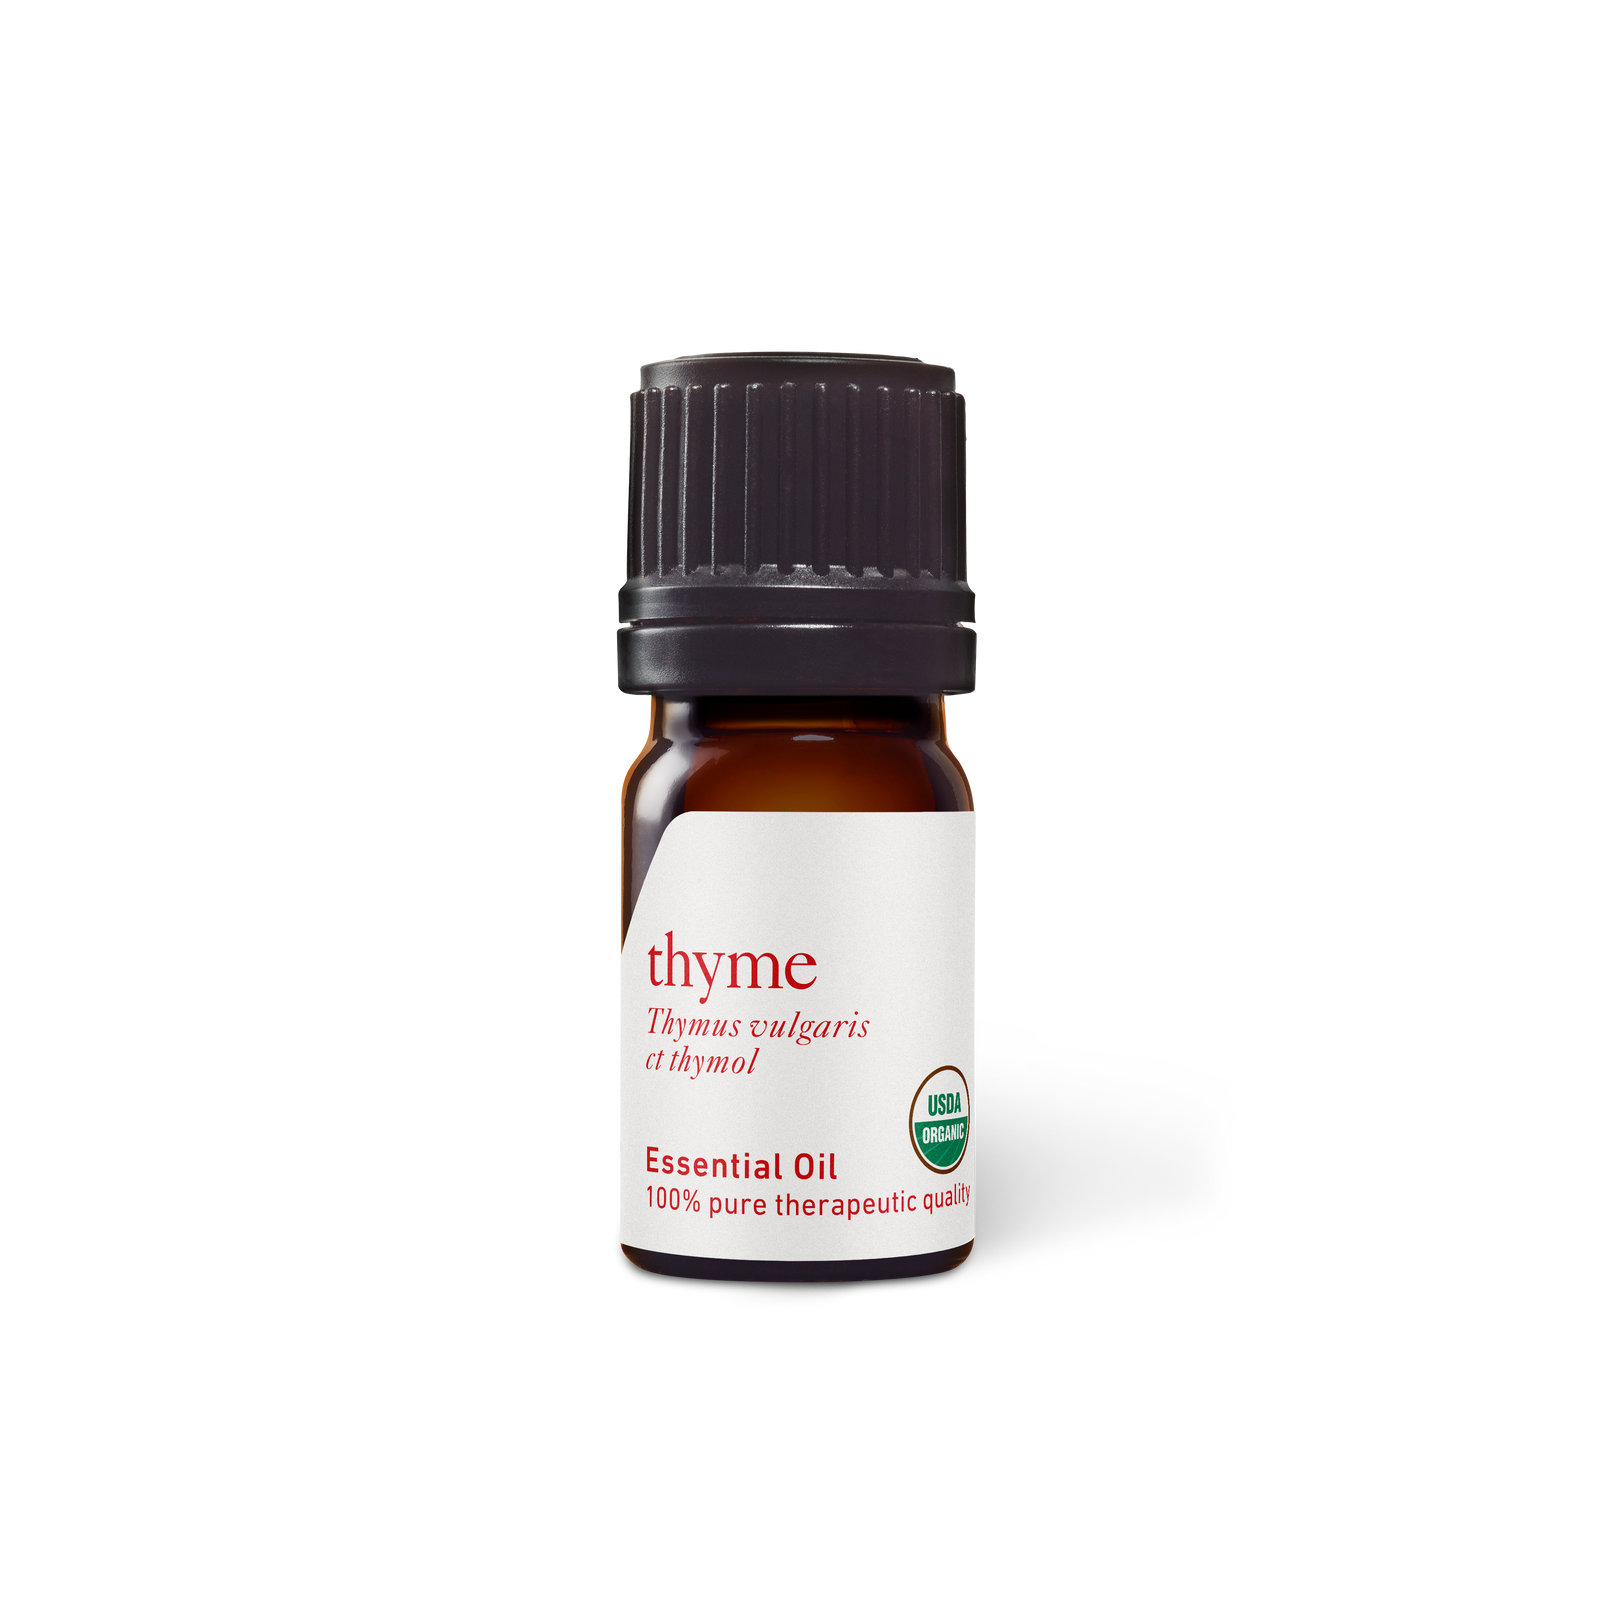 Thyme ct Thymol Oil - Expired